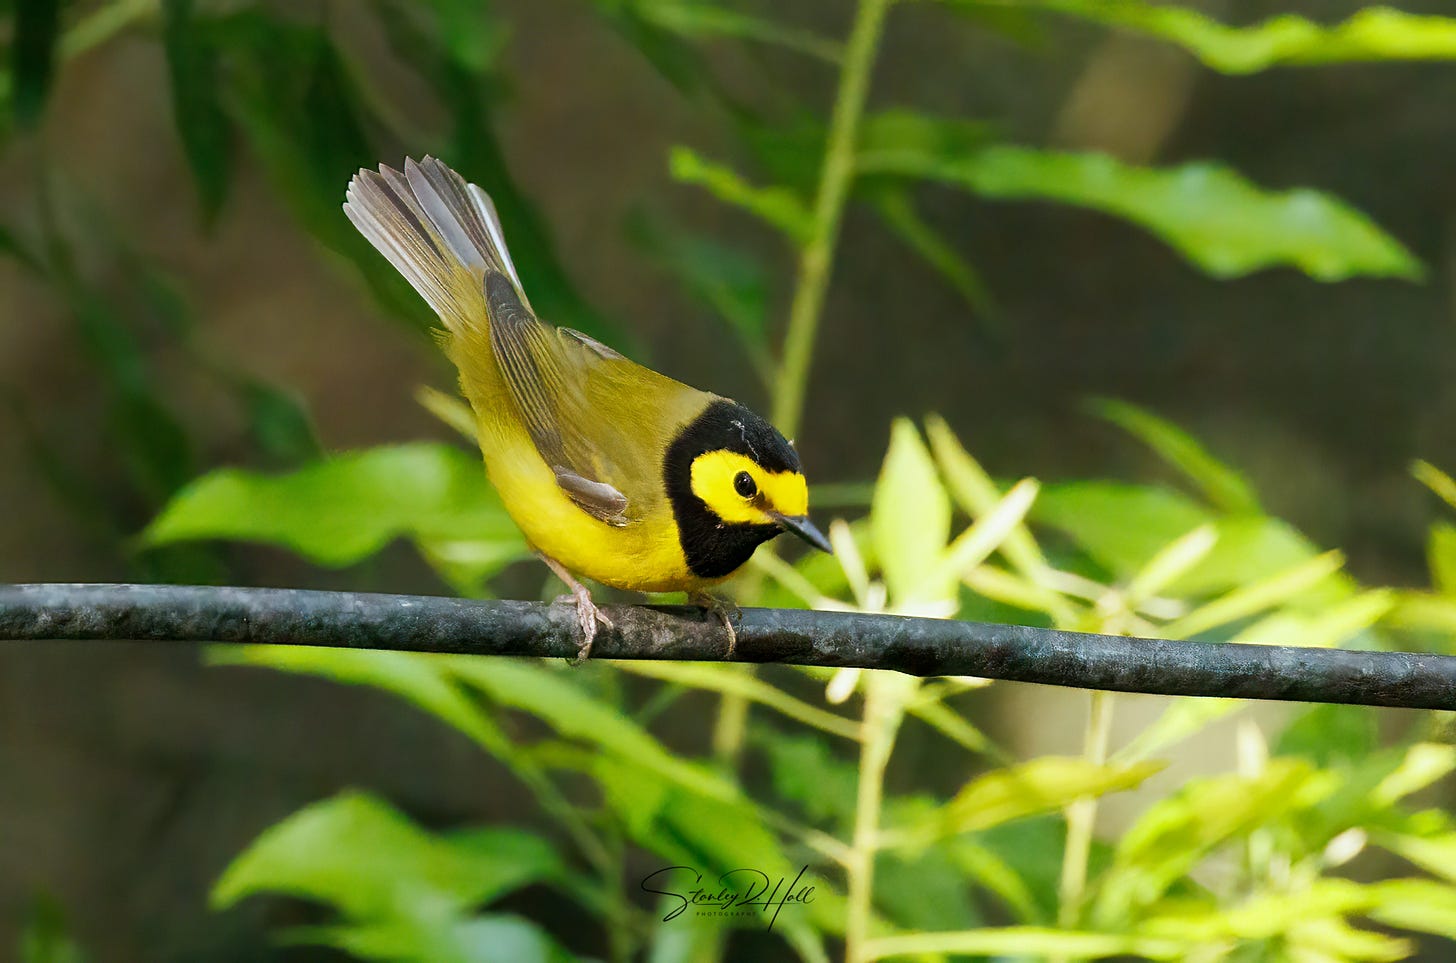 a yellow and black hooded warbler on a branch with a blurred green background